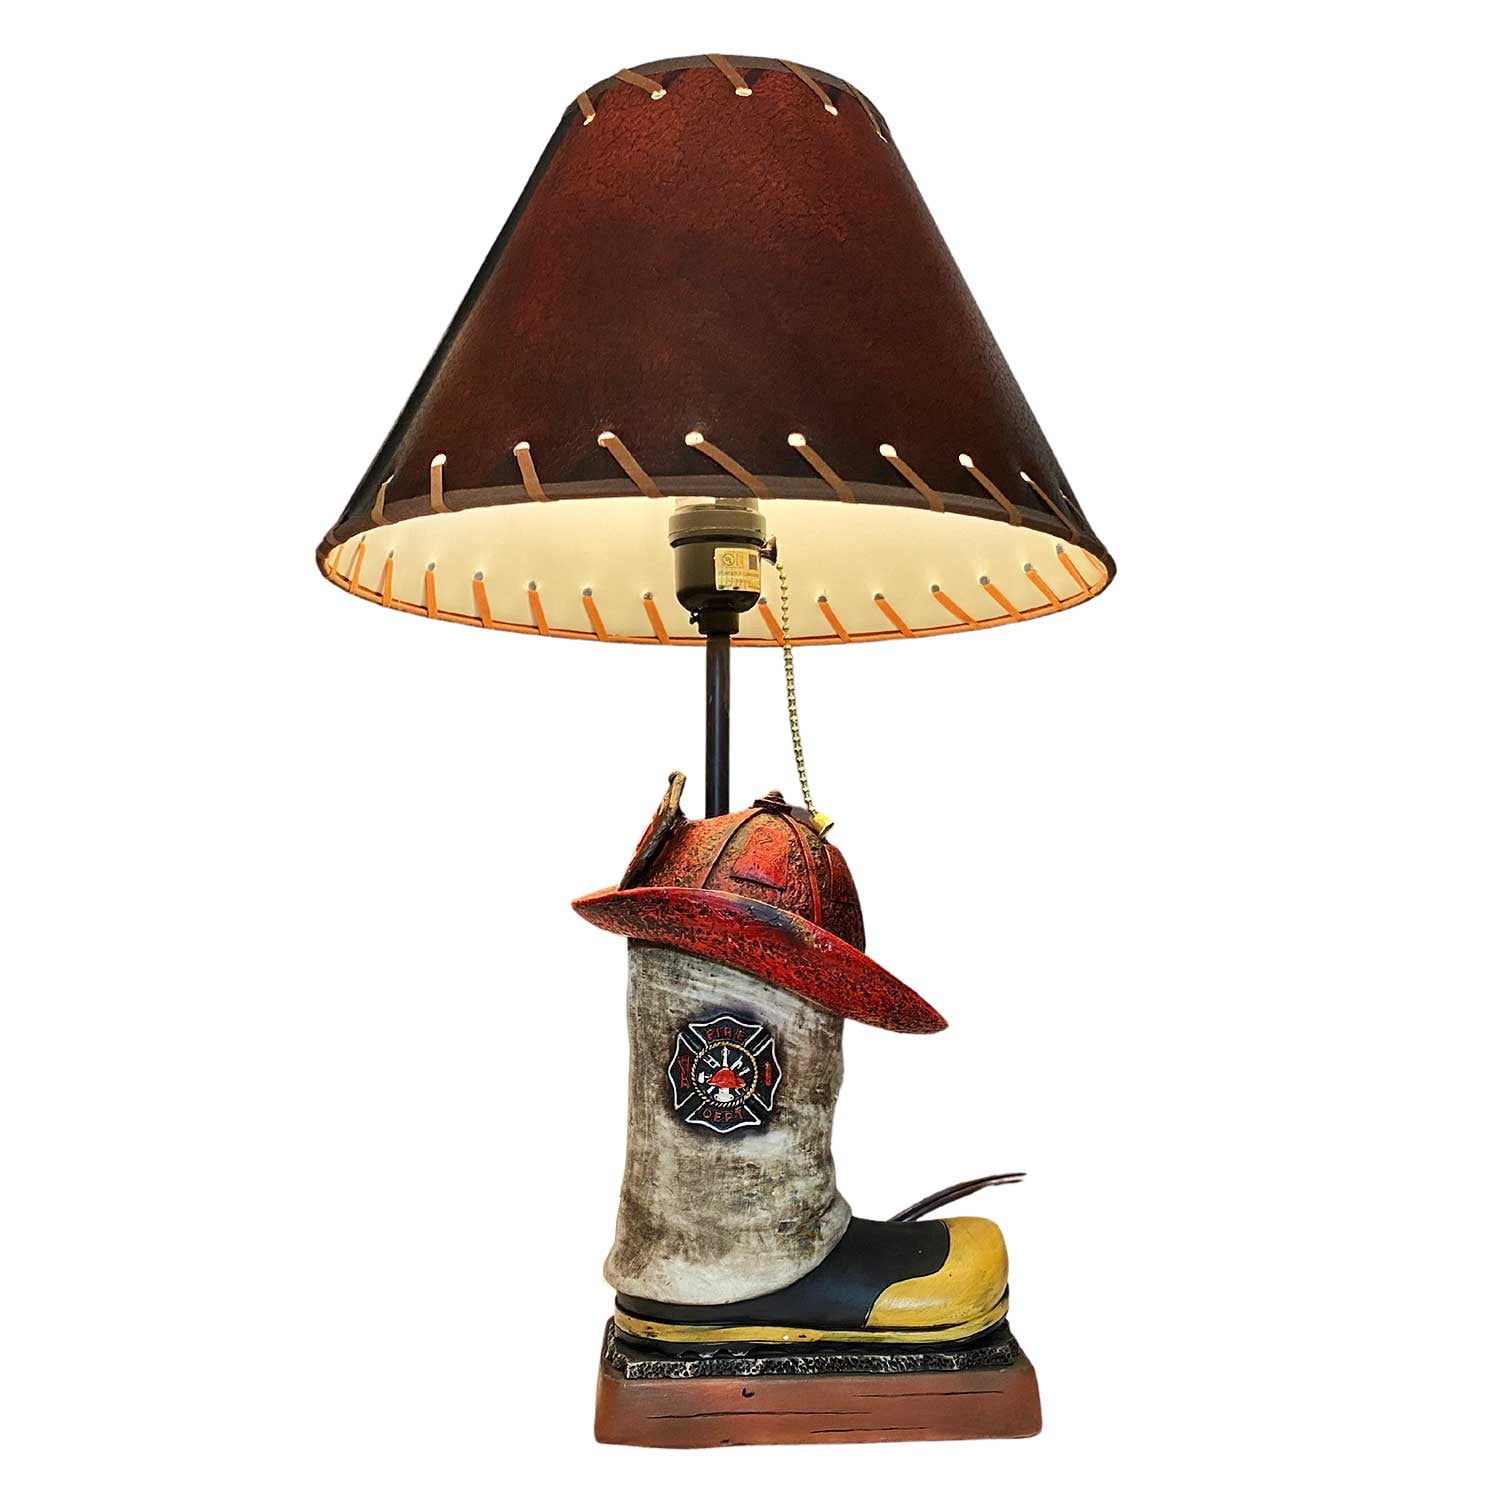 BY TAGZ SPORTS FIRE DEPARTMENT LAMP 